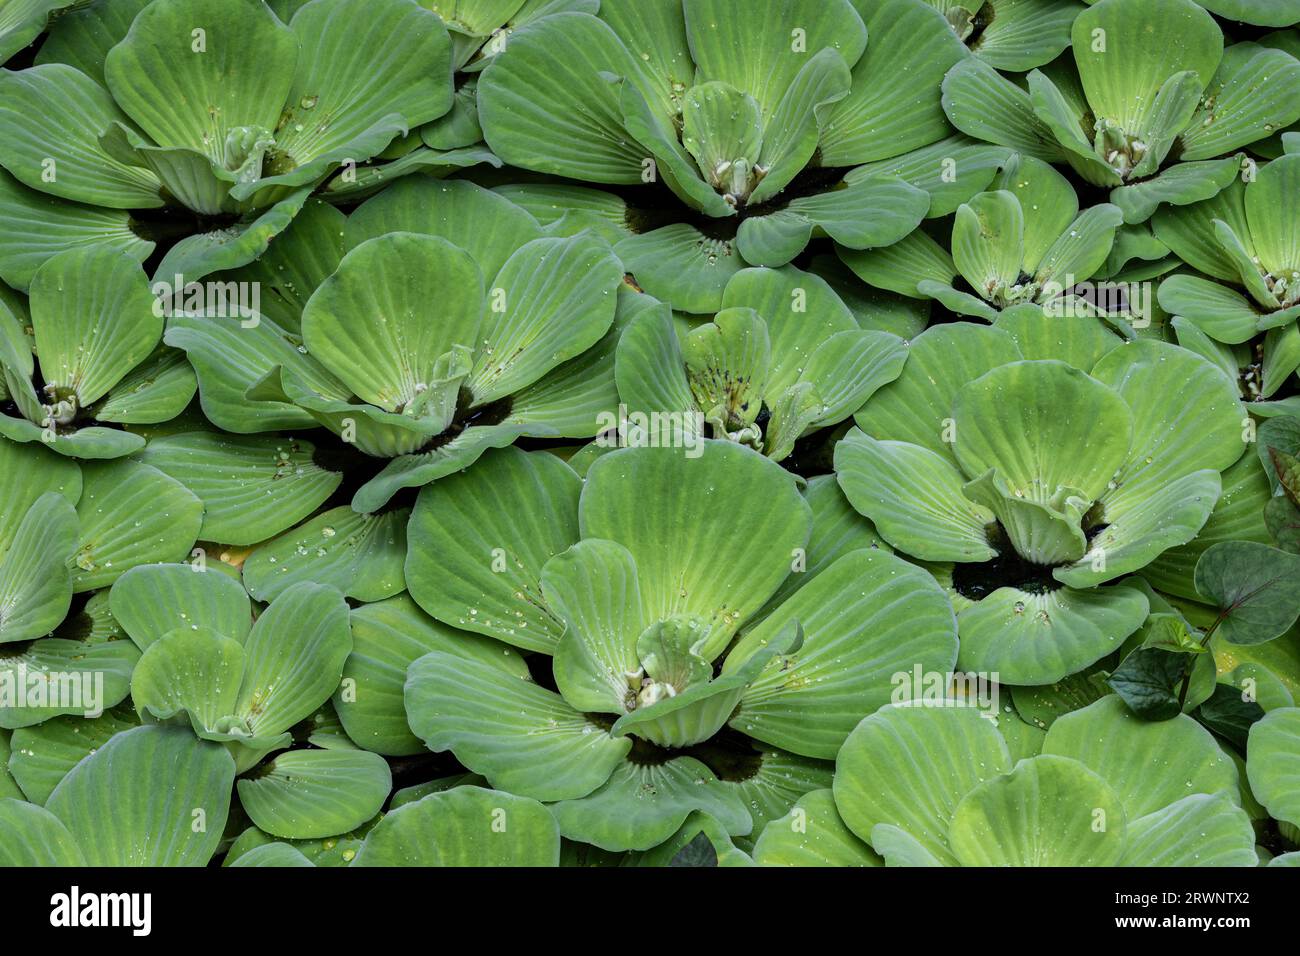 Closeup of water lettuce (Pistia stratiotes) flowing on the surface of a pond in St. Louis, Missouri. Water droplets on the petals. Stock Photo